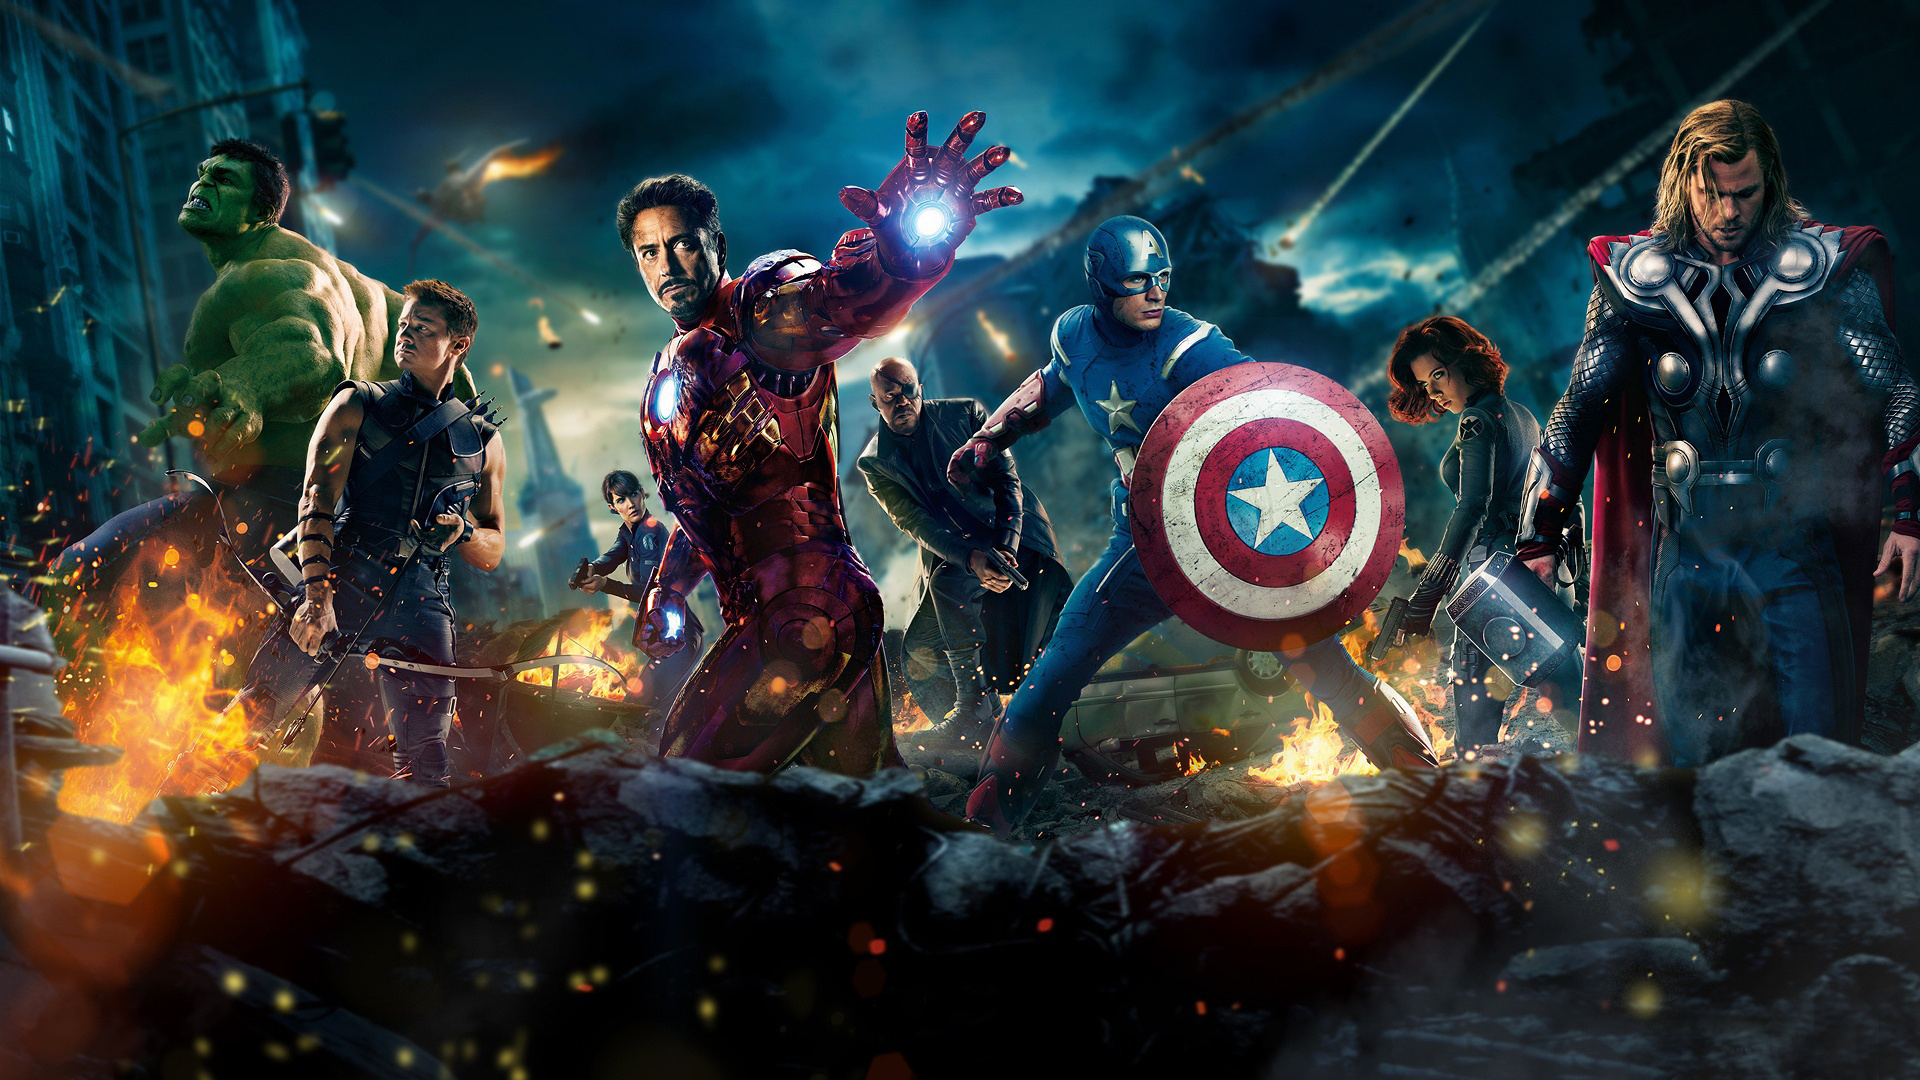 The Avengers Wallpaper HD Heroes Film Ic Strip Action Actors